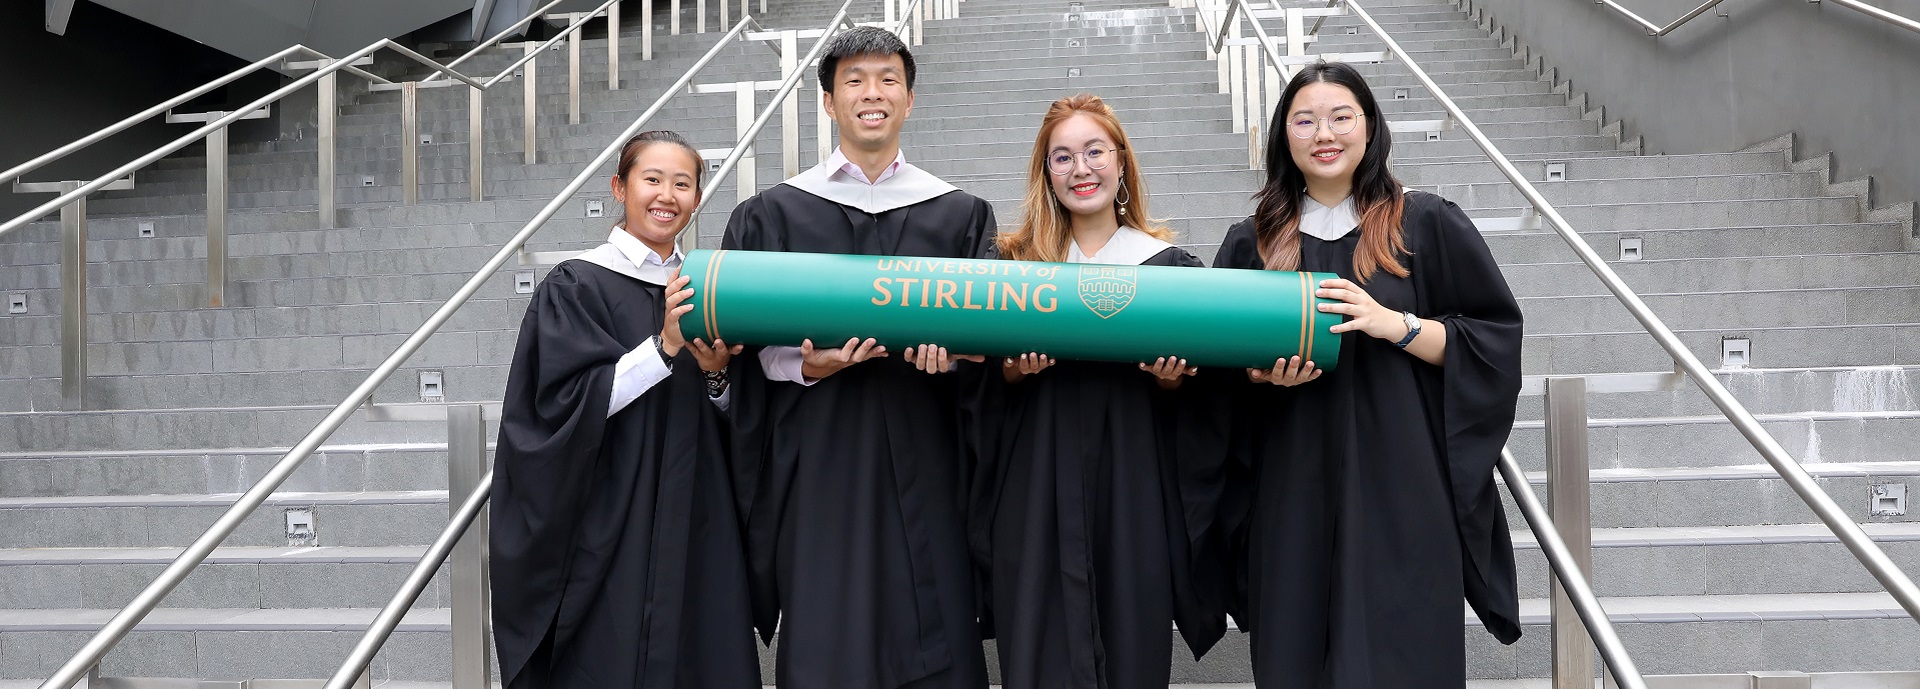 Four Singapore students with graduation robes and giant scroll standing on steps